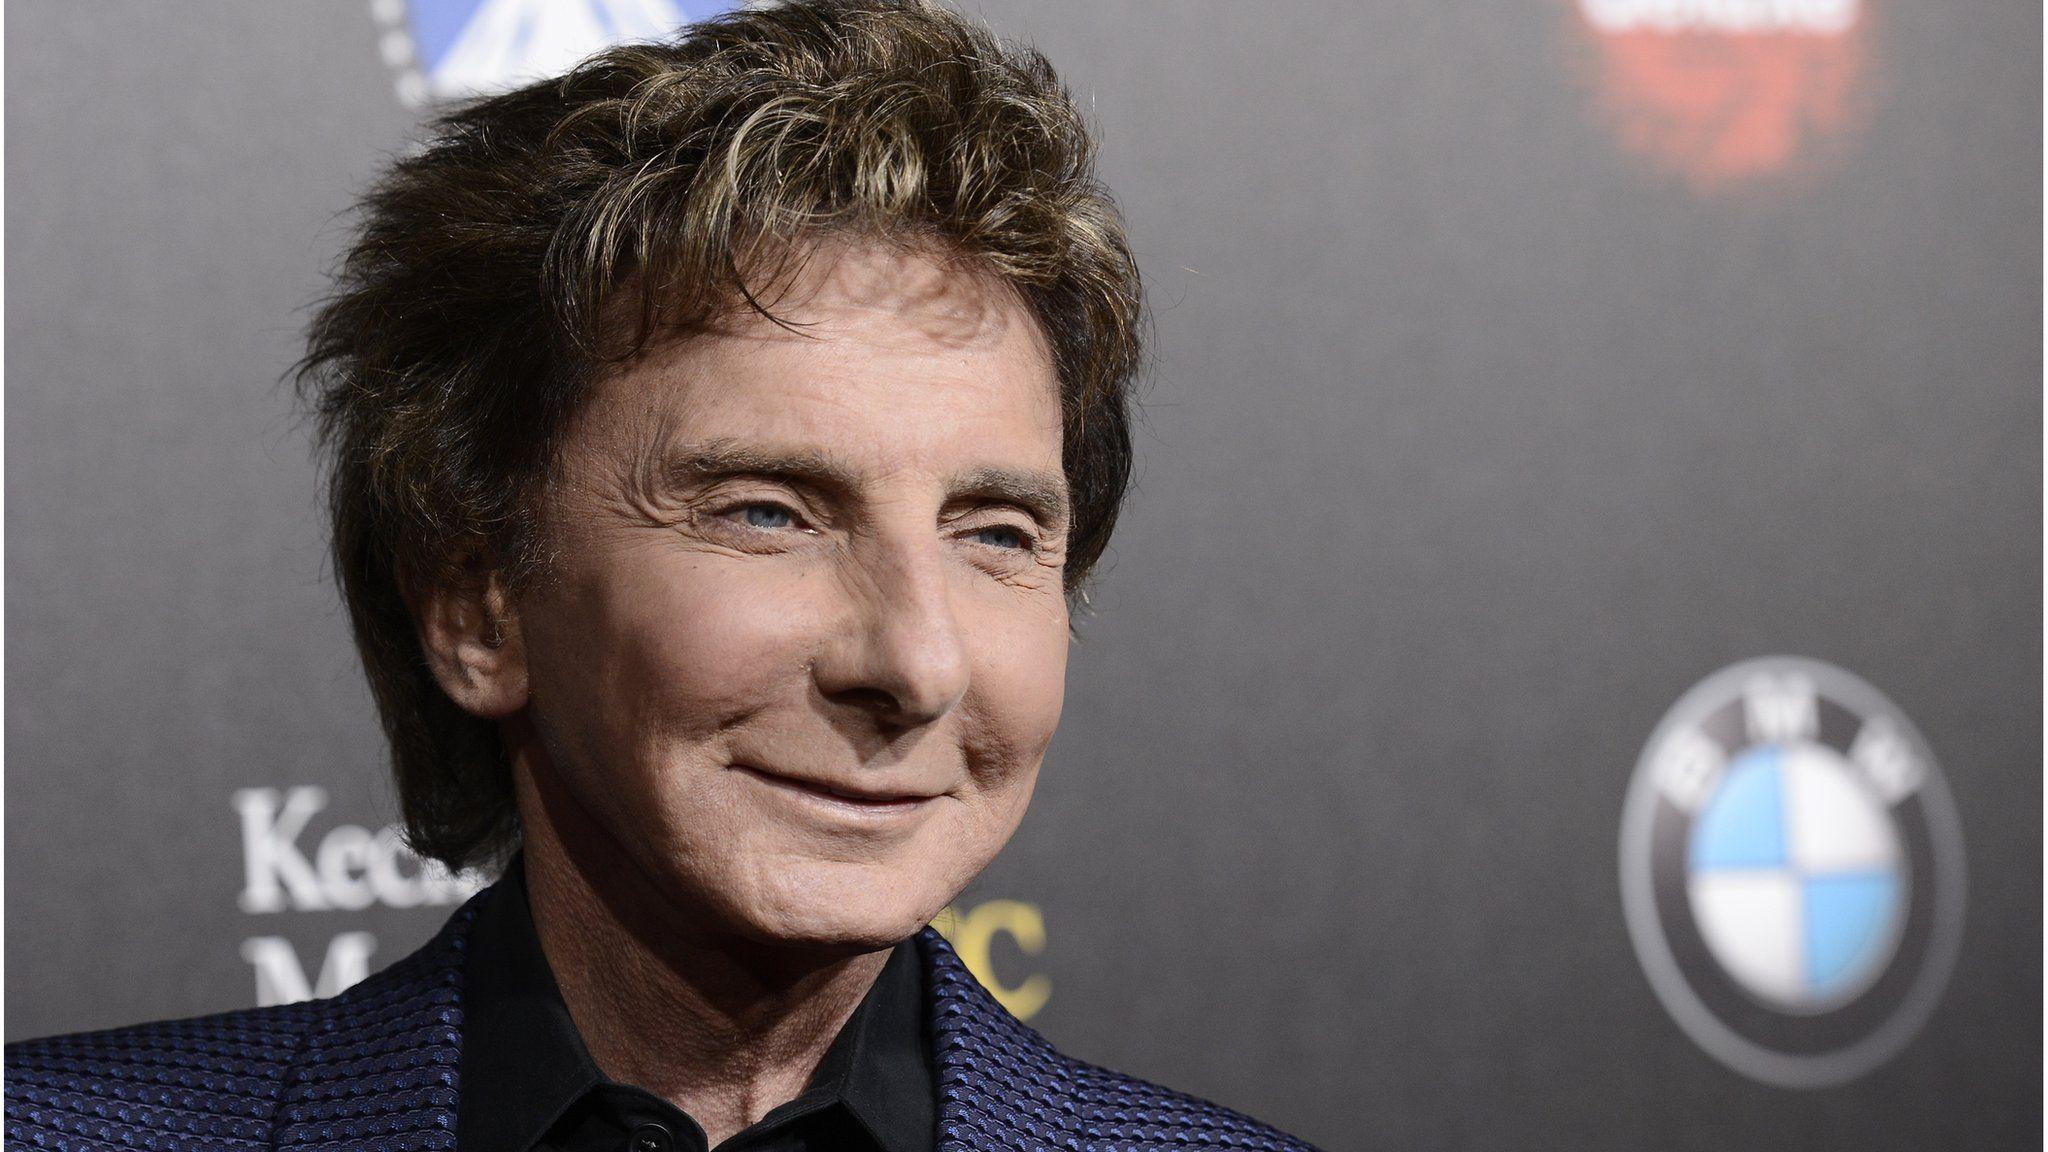 Barry Manilow opens up about sexuality